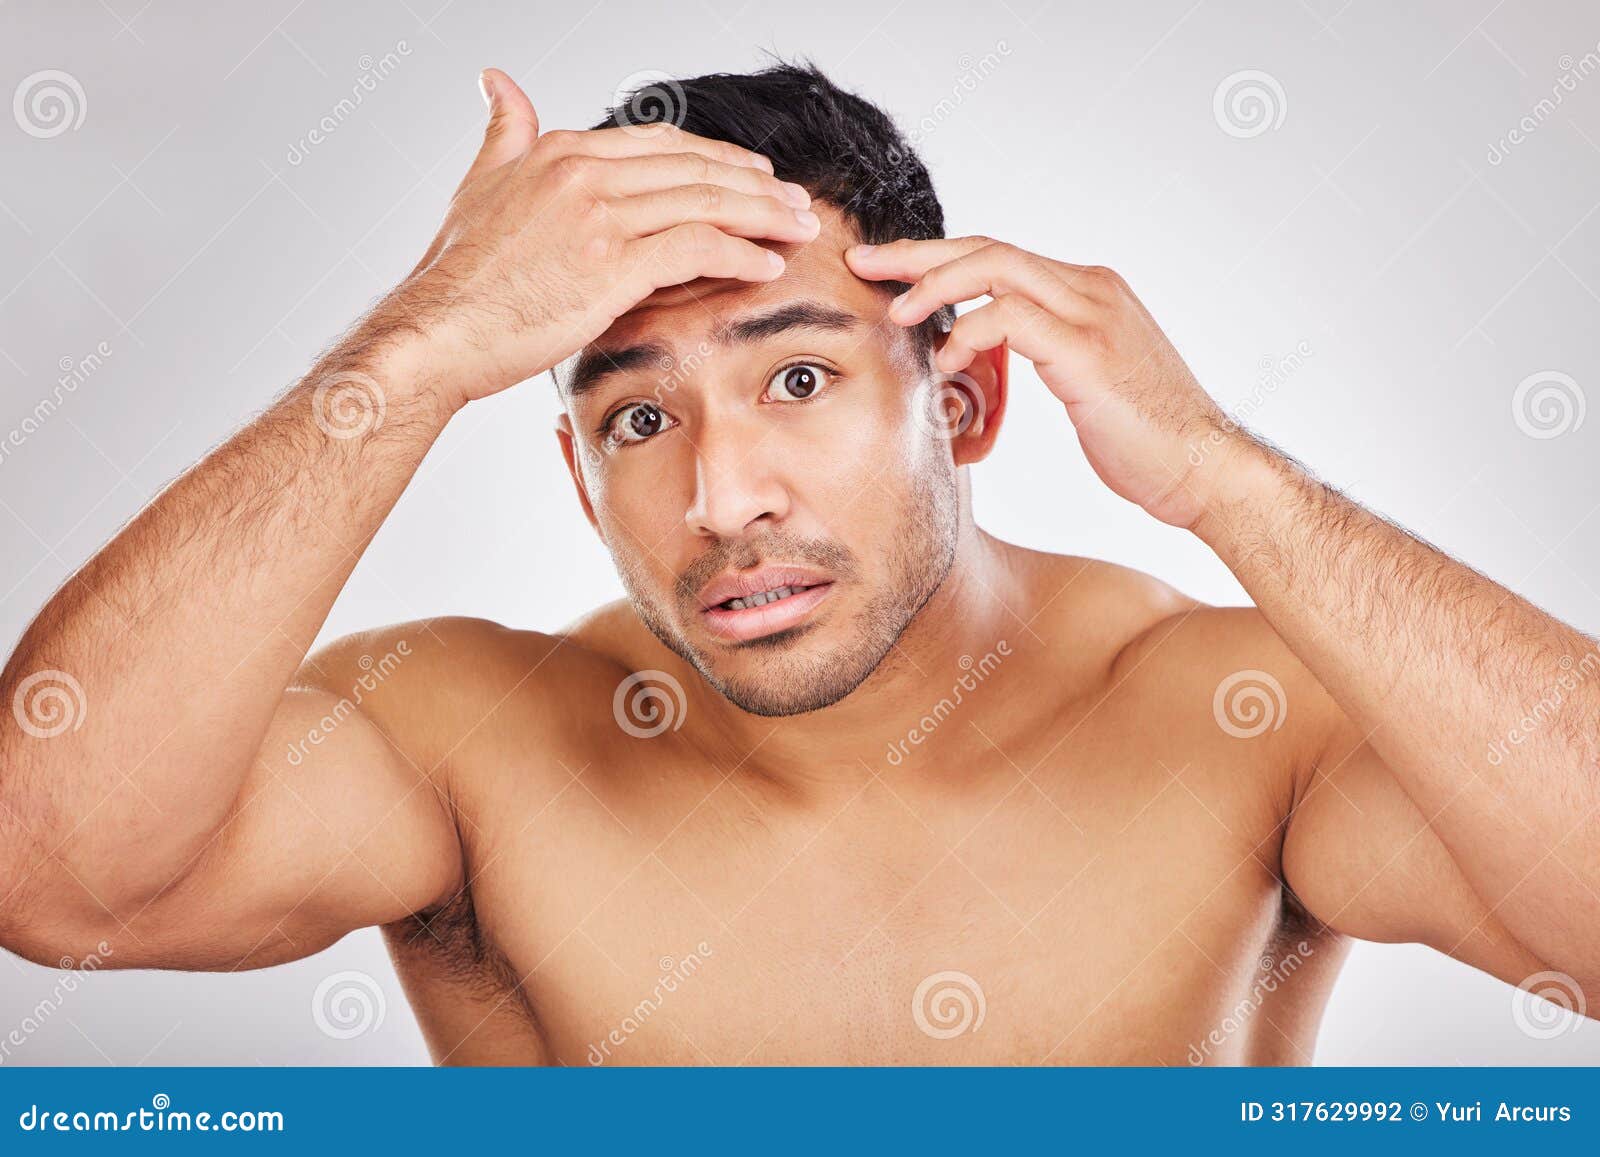 beauty, pimple and portrait of natural man in studio on white background for inspection or skincare. acne, blemish and